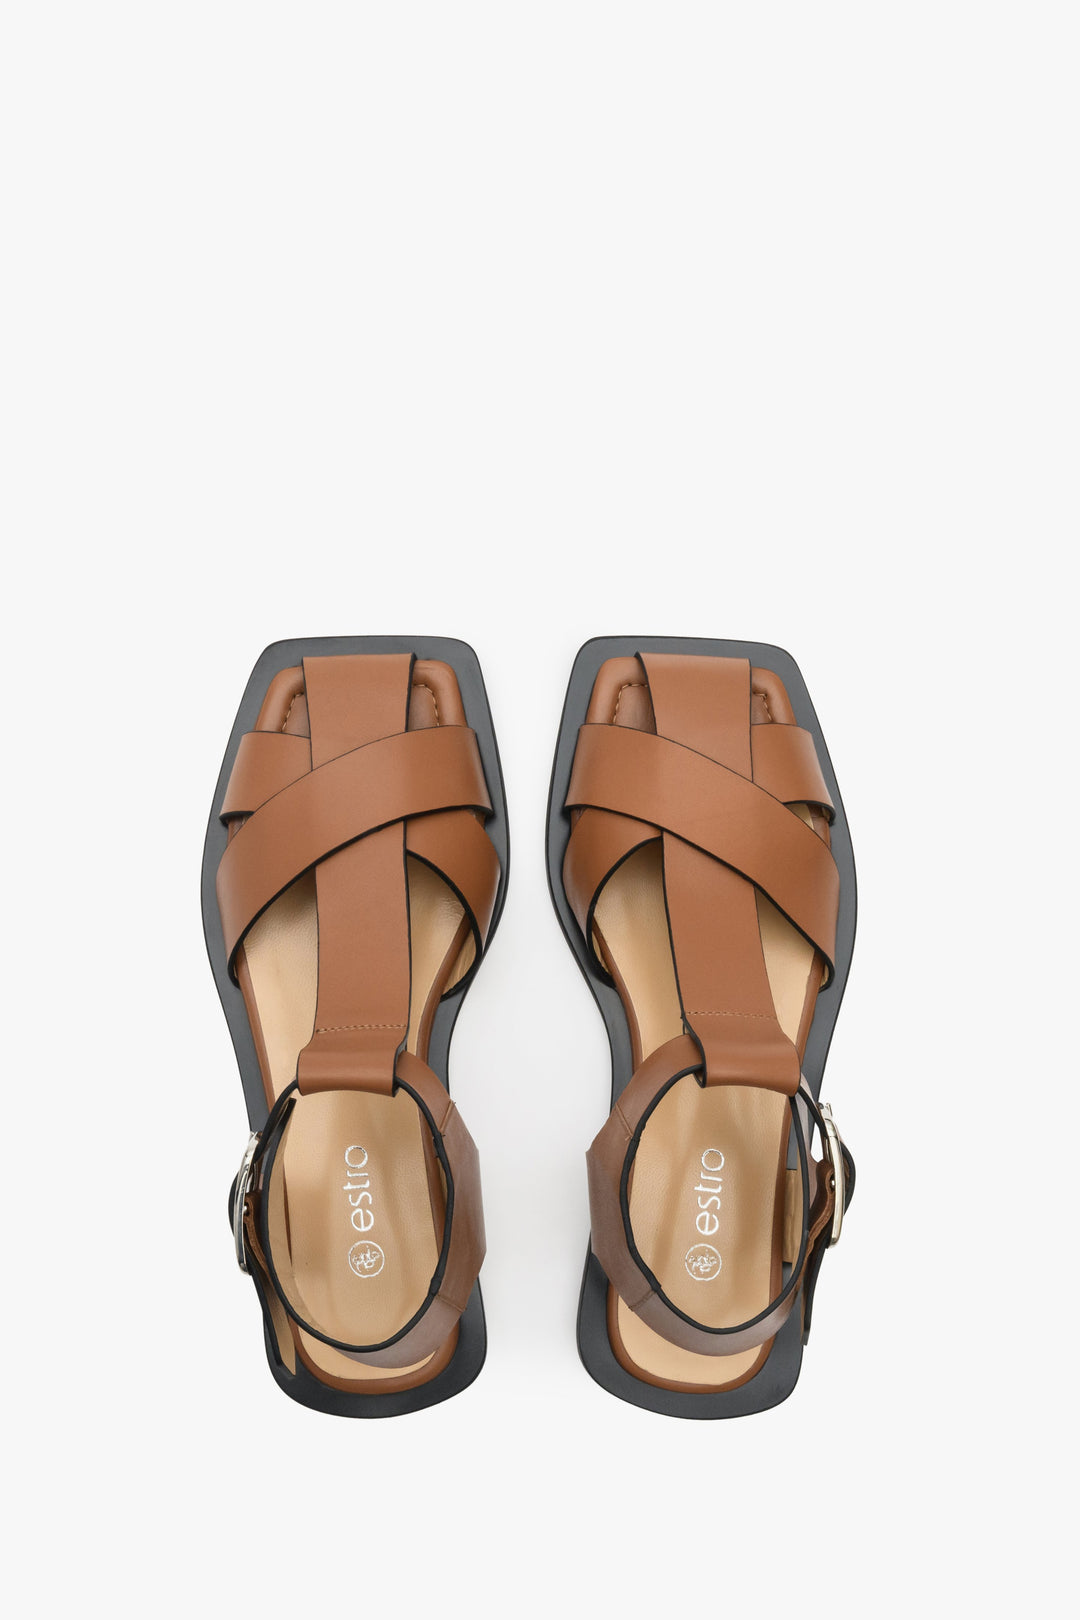 Women's brown leather sandals for summer Estro - presentation of footwear from above.